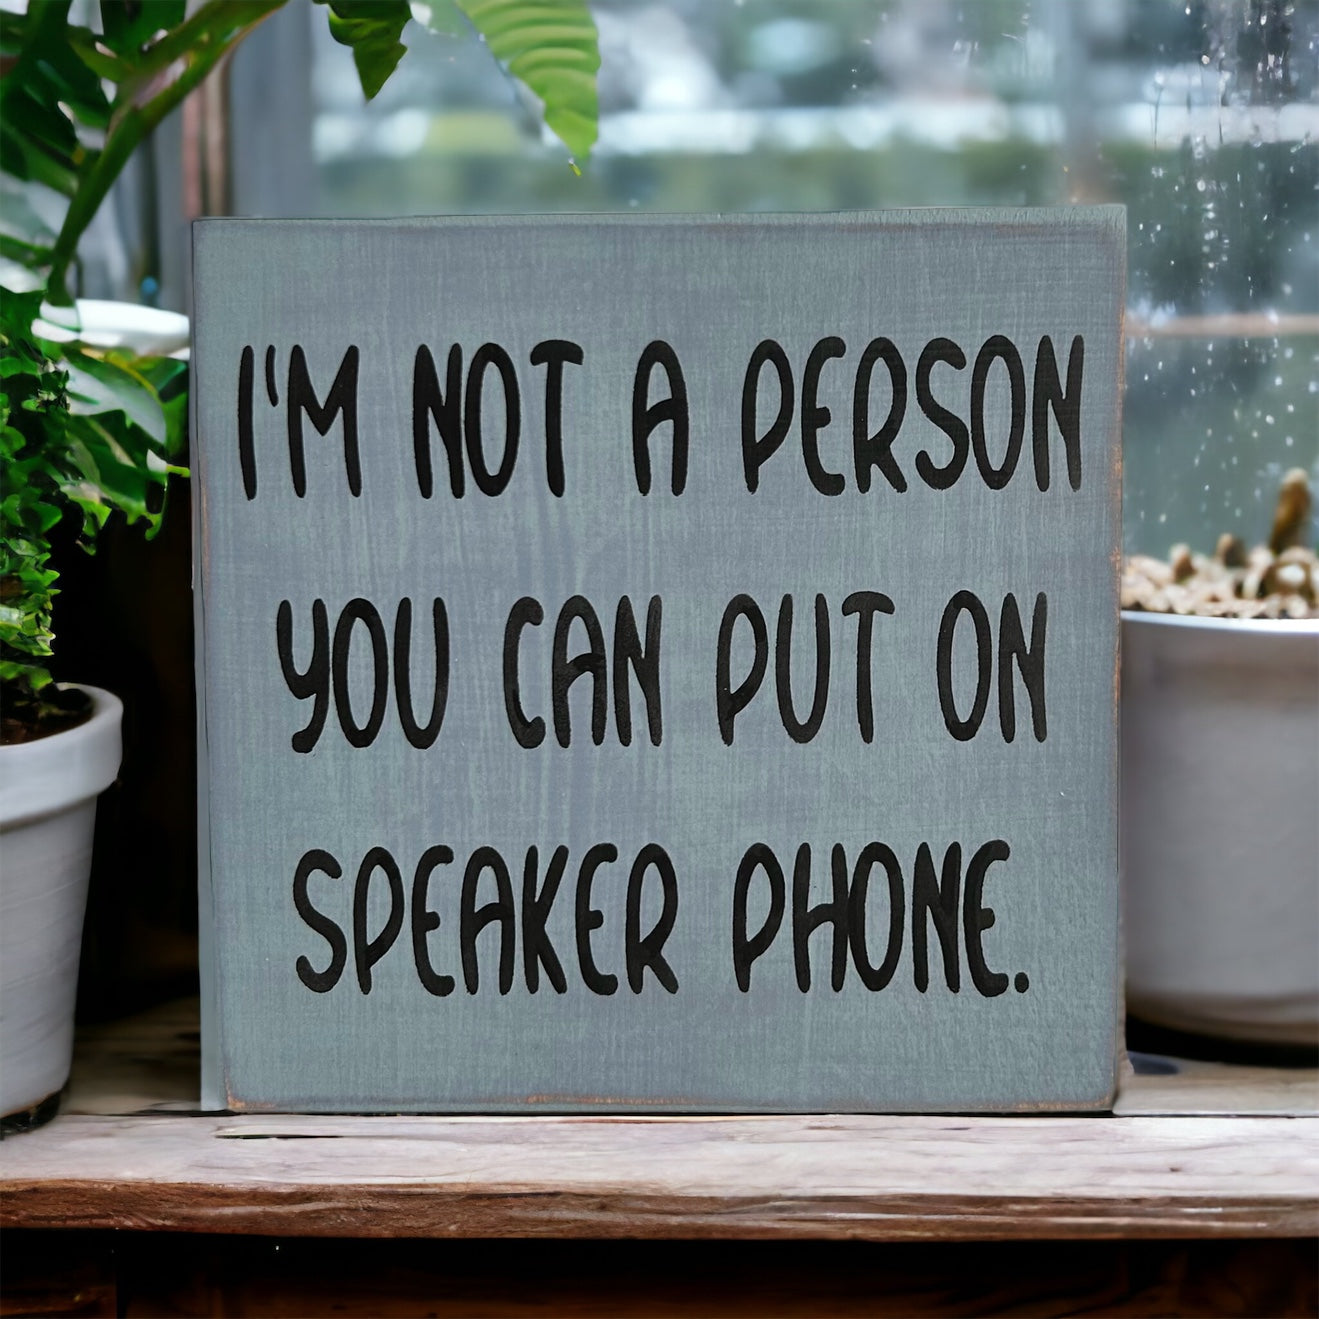 "Not a person you can put on speakerphone" wood sign